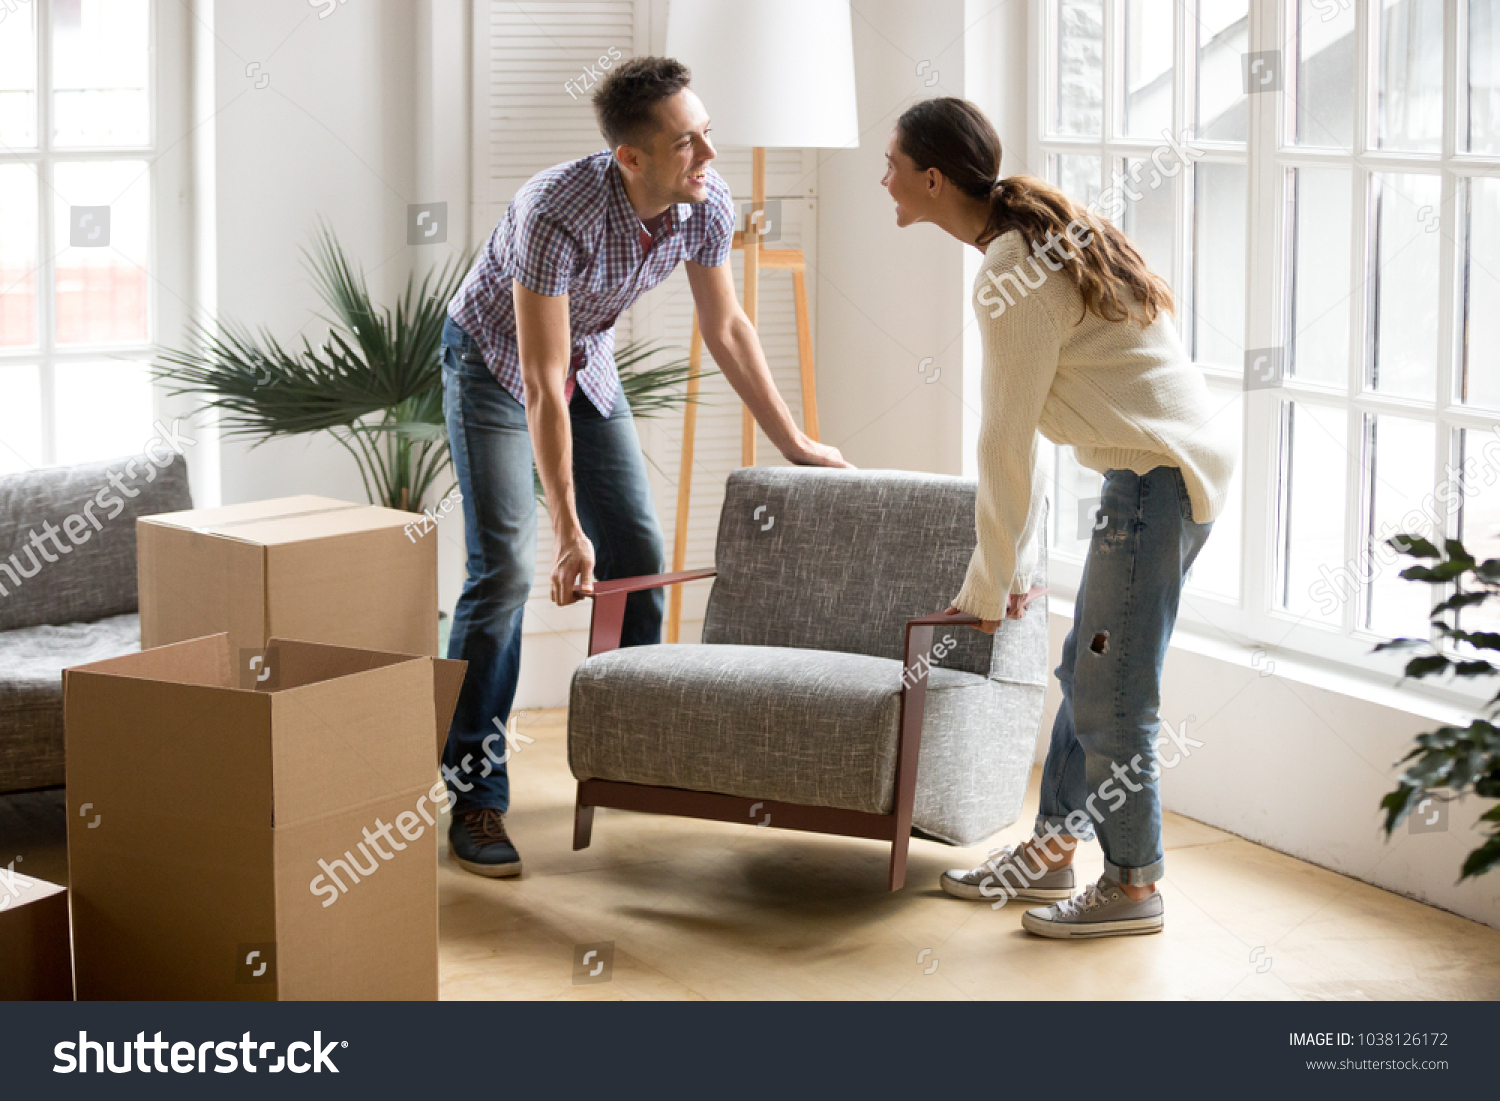 Smiling couple carrying modern chair together placing furniture moving into new home, young family discussing house improvement interior design while furnishing living room, remodeling and renovation #1038126172